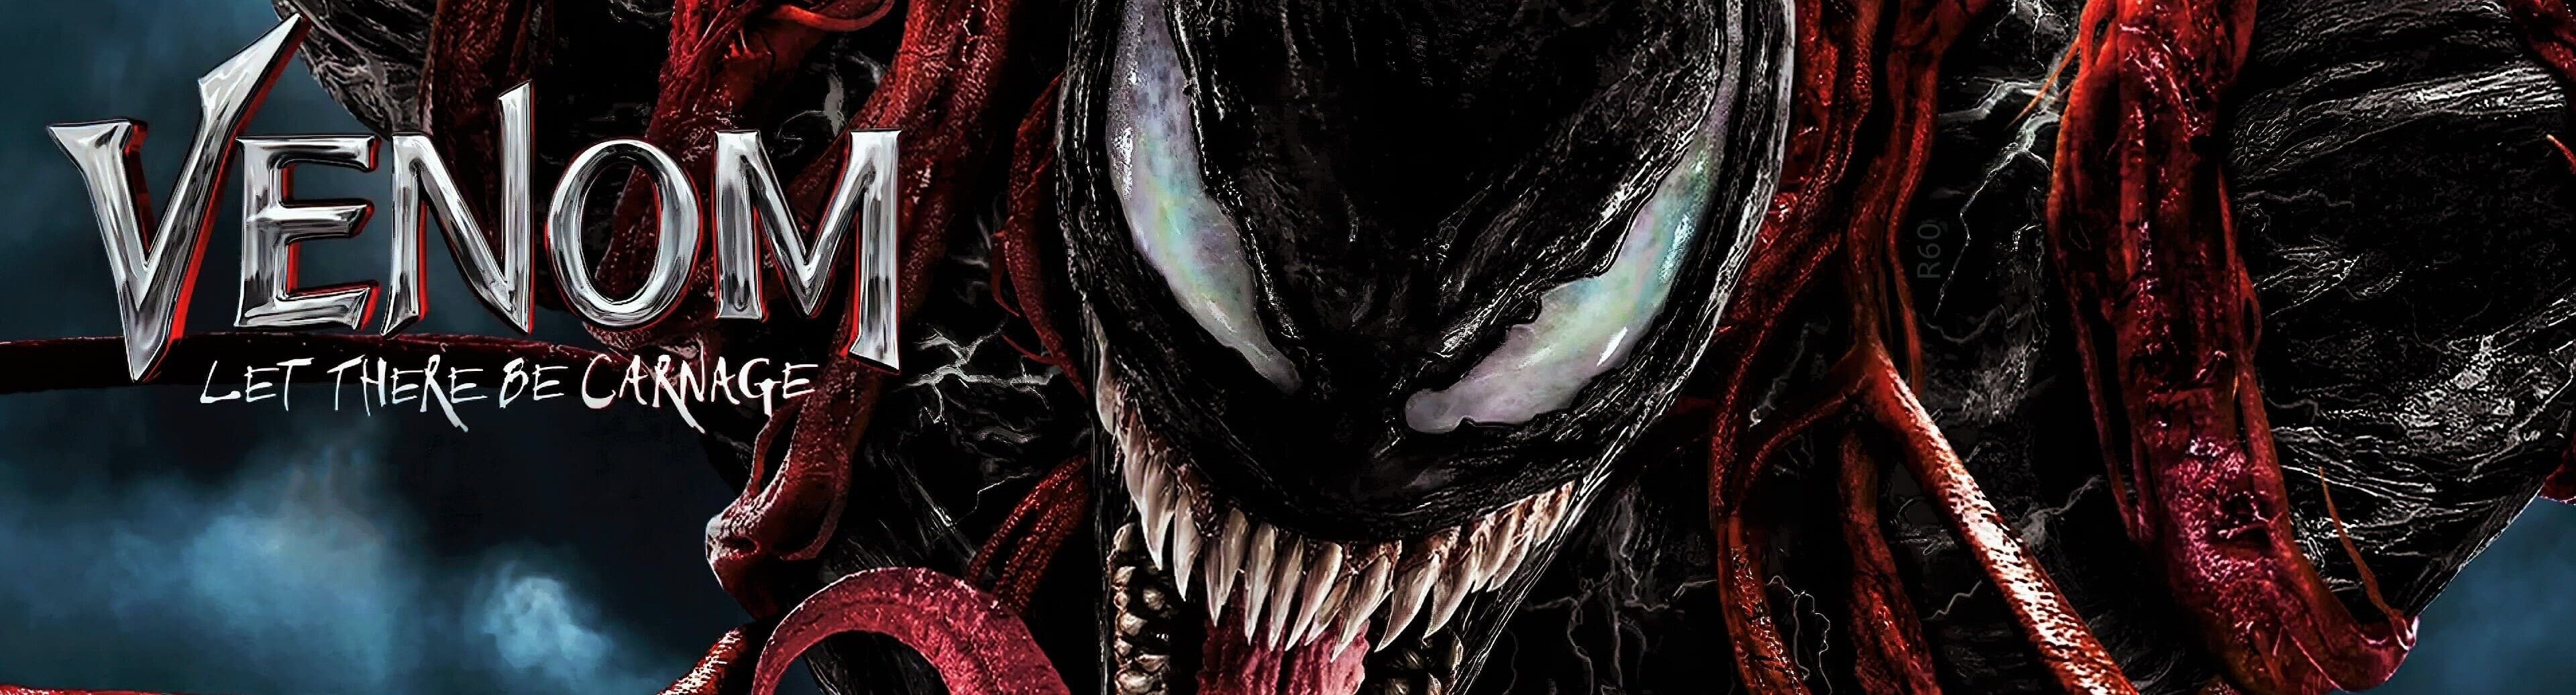 Watch Venom 2: Let There Be Carnage Full Movie Free HD's background image'